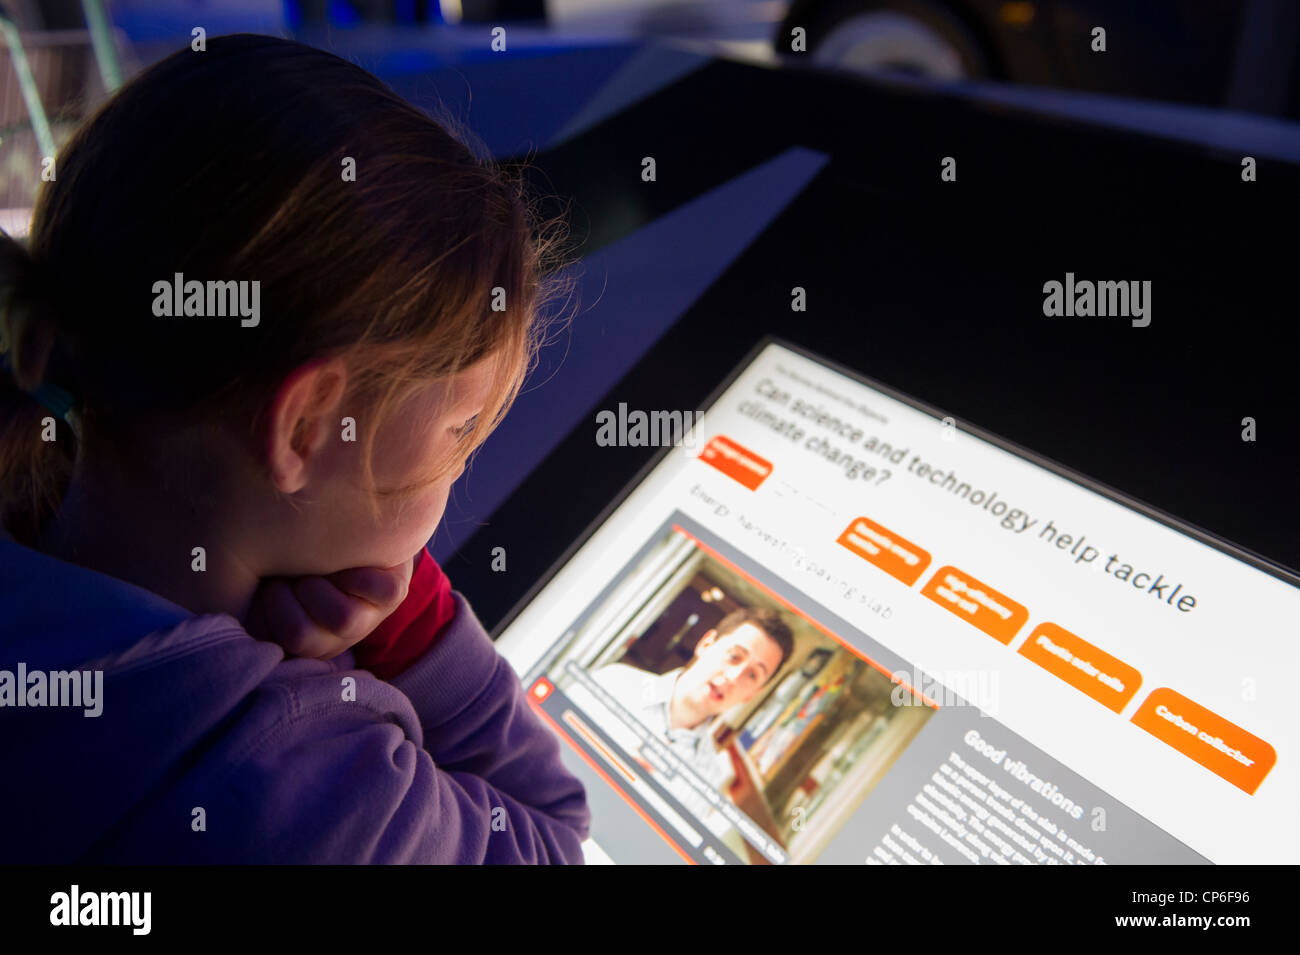 A young girl reading an interactive exhibit on climate change in the Science Museum in London. Stock Photo